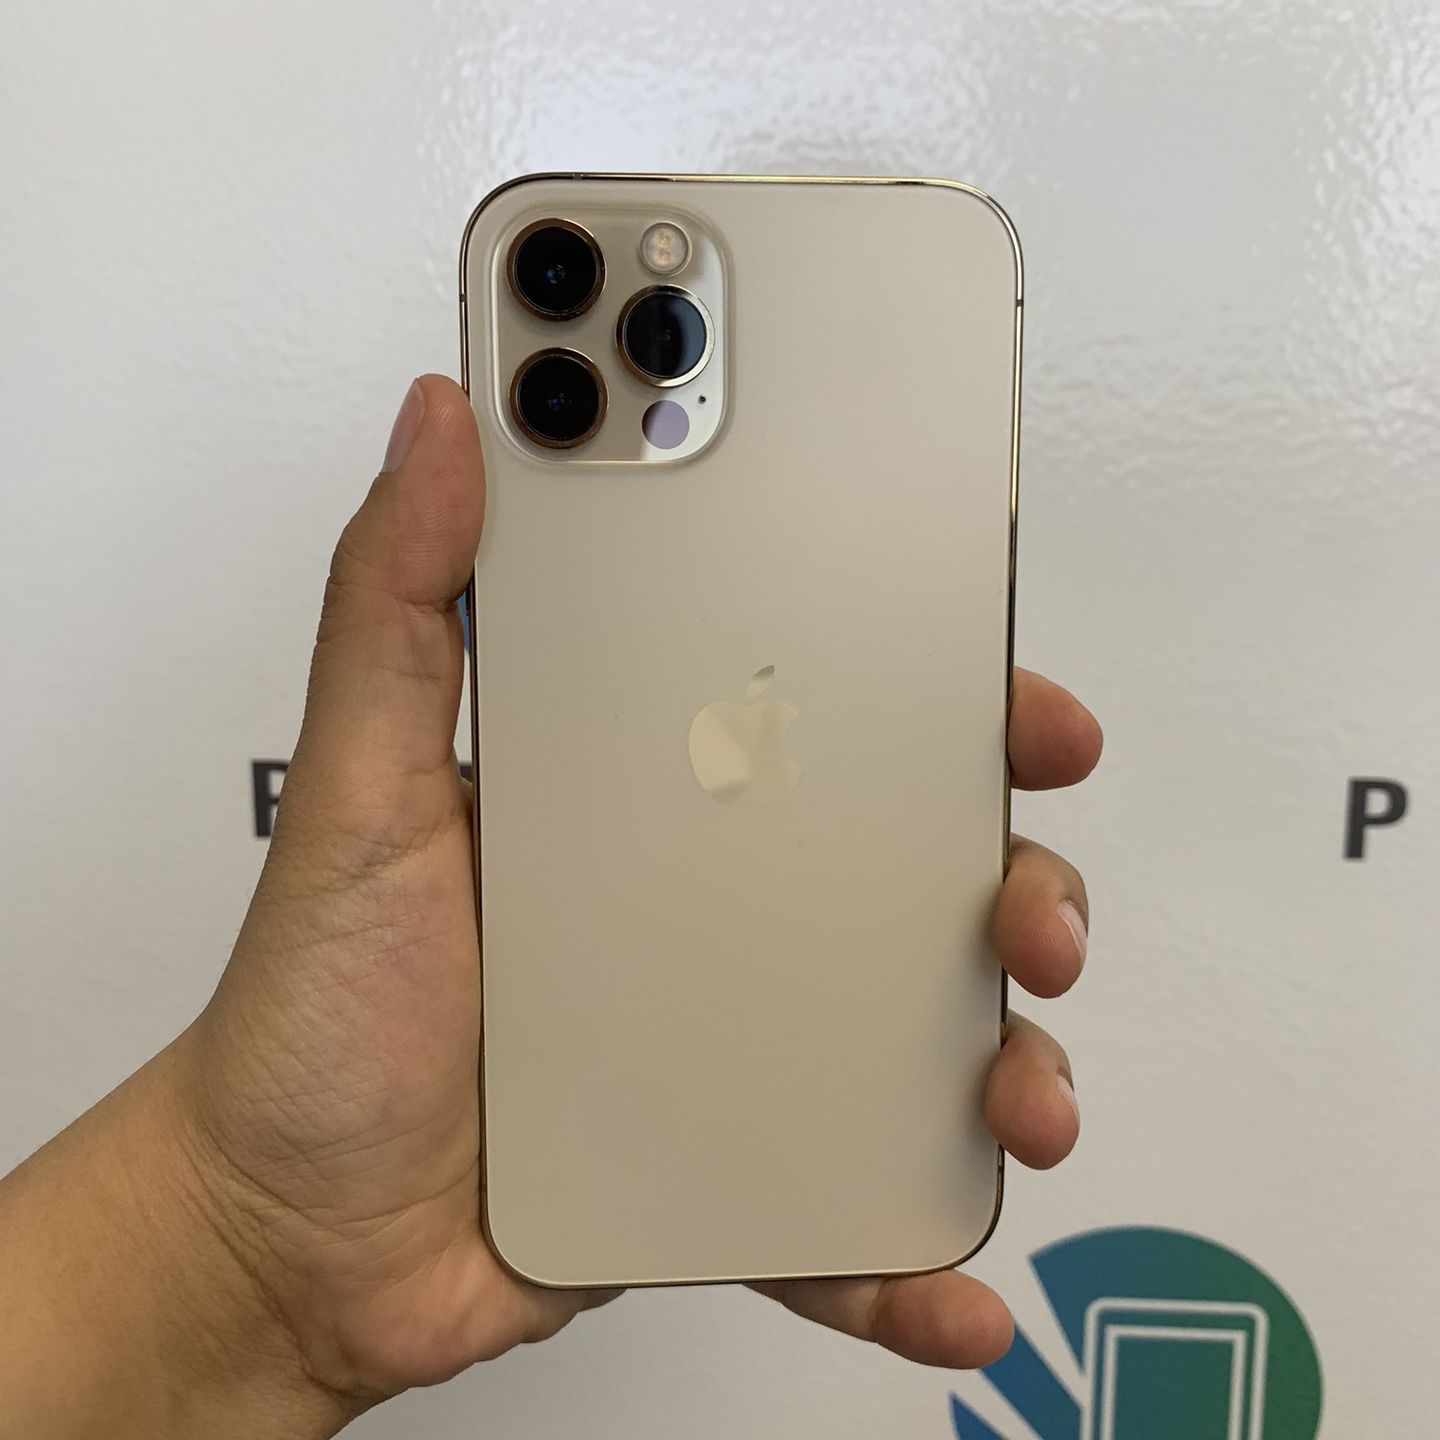 🤍📱 iPhone 12 Pro 128 GB Unlocked BH86% 🔋 Case And Headphones For Free ❤️‍🔥🚨